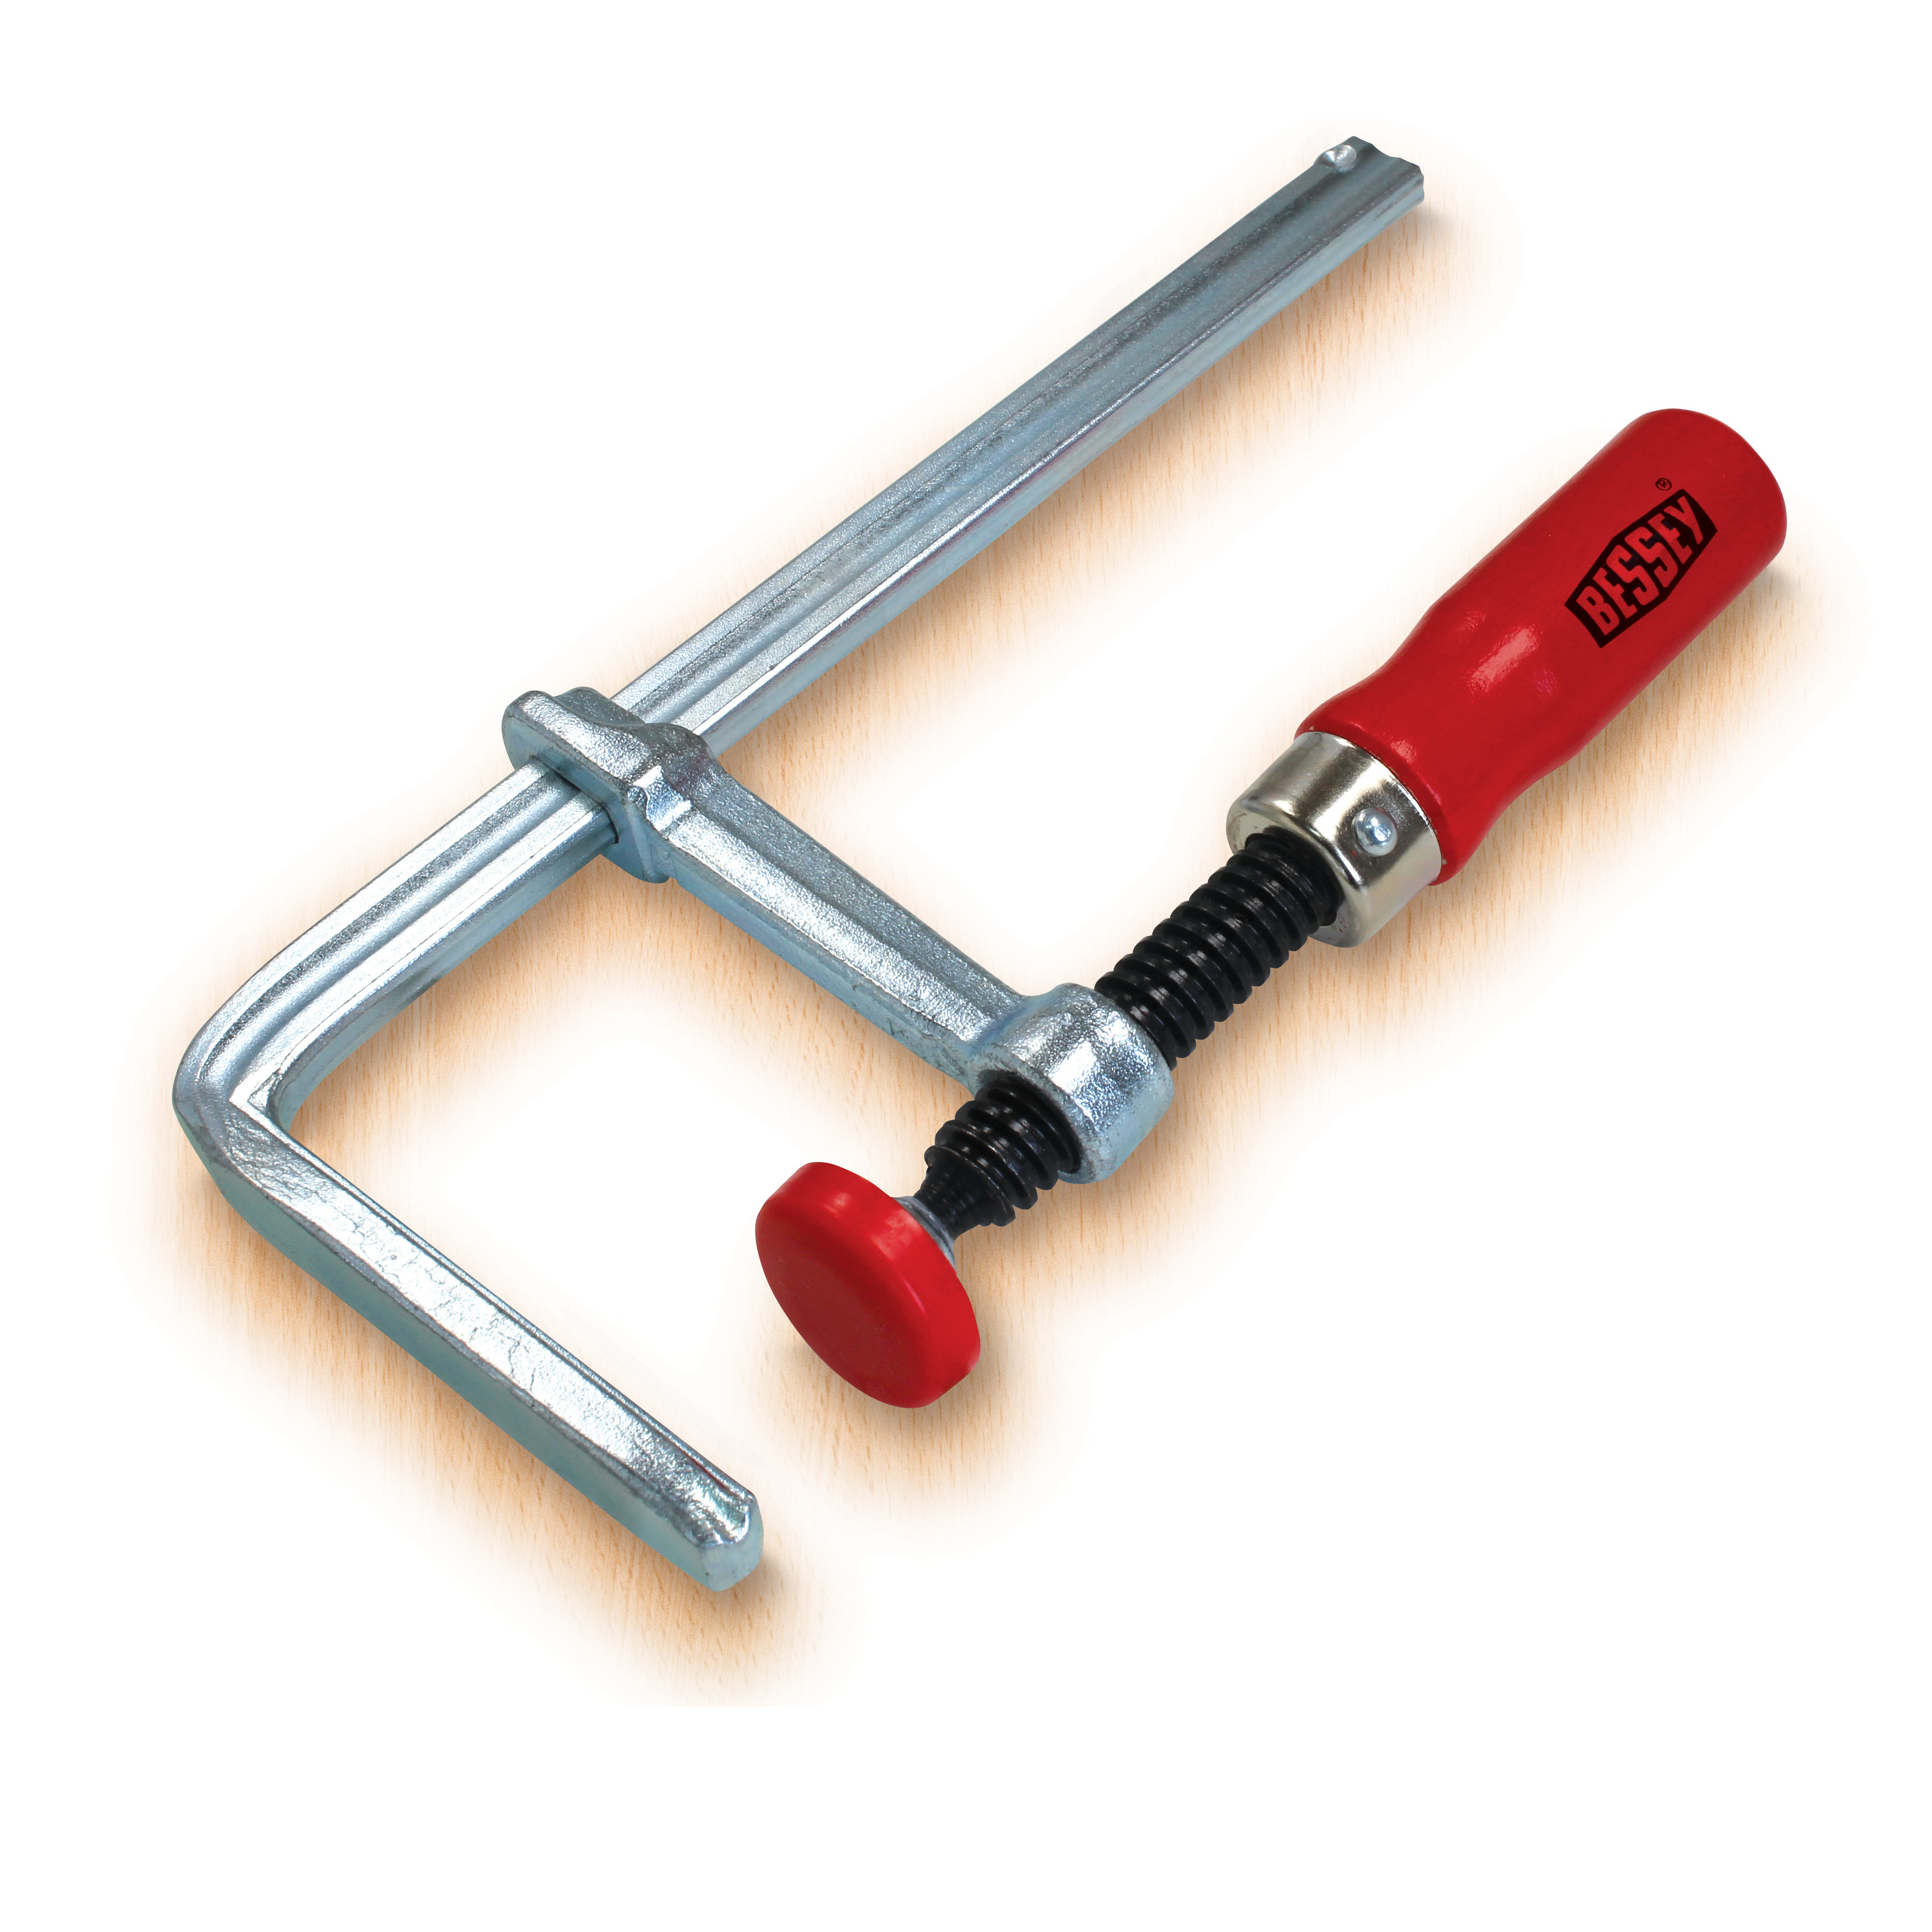 Bessey GTR30B6 Track/Table Clamp, 1.8 N Clamping, 6-5/16 in Max Opening Size, 2-5/16 in D Throat, Steel Body - 3